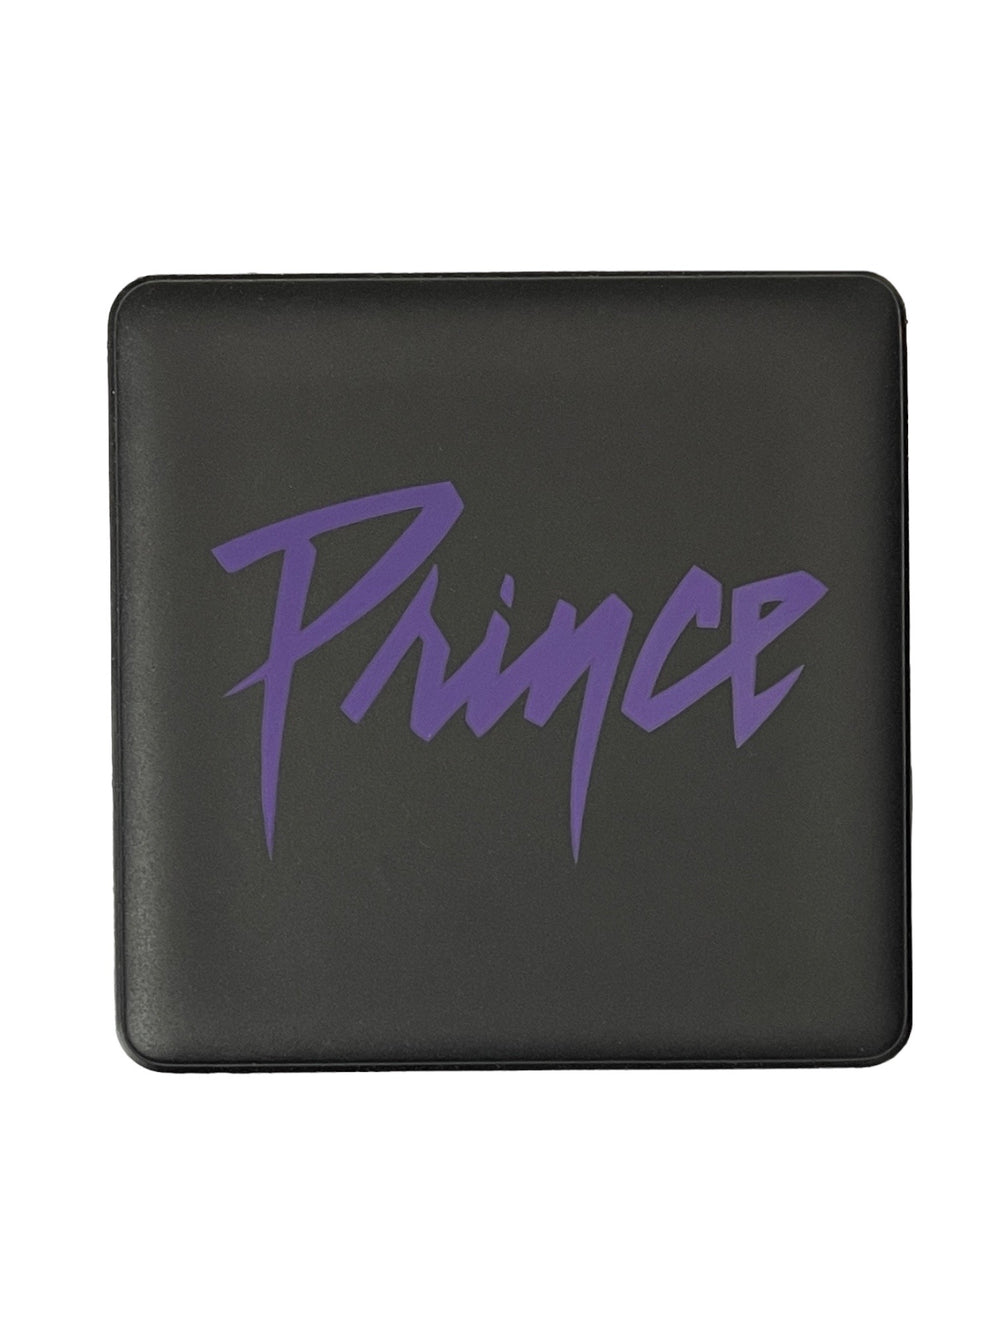 Prince – Official Prince Coaster XCLUSIVE Limited Edition Purple Rain Name Design